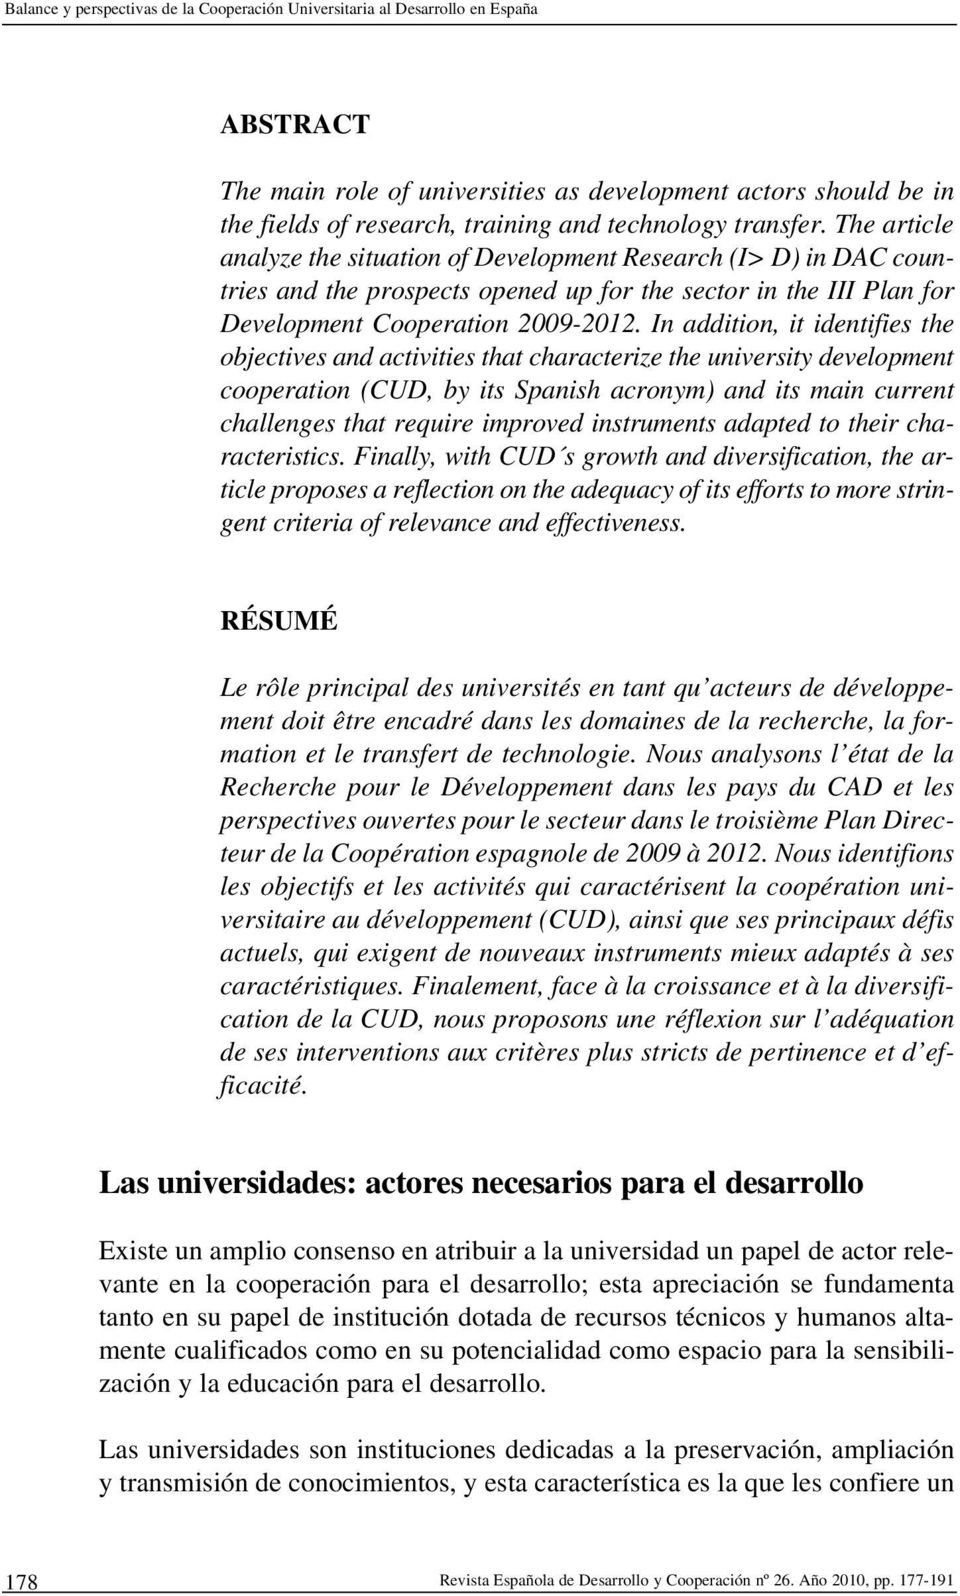 T h e article analyze th e situation of Development R esearch (I> D) in DAC countries and th e prospects opened up for th e sector in th e III Plan for Development Cooperation 2009-2012.